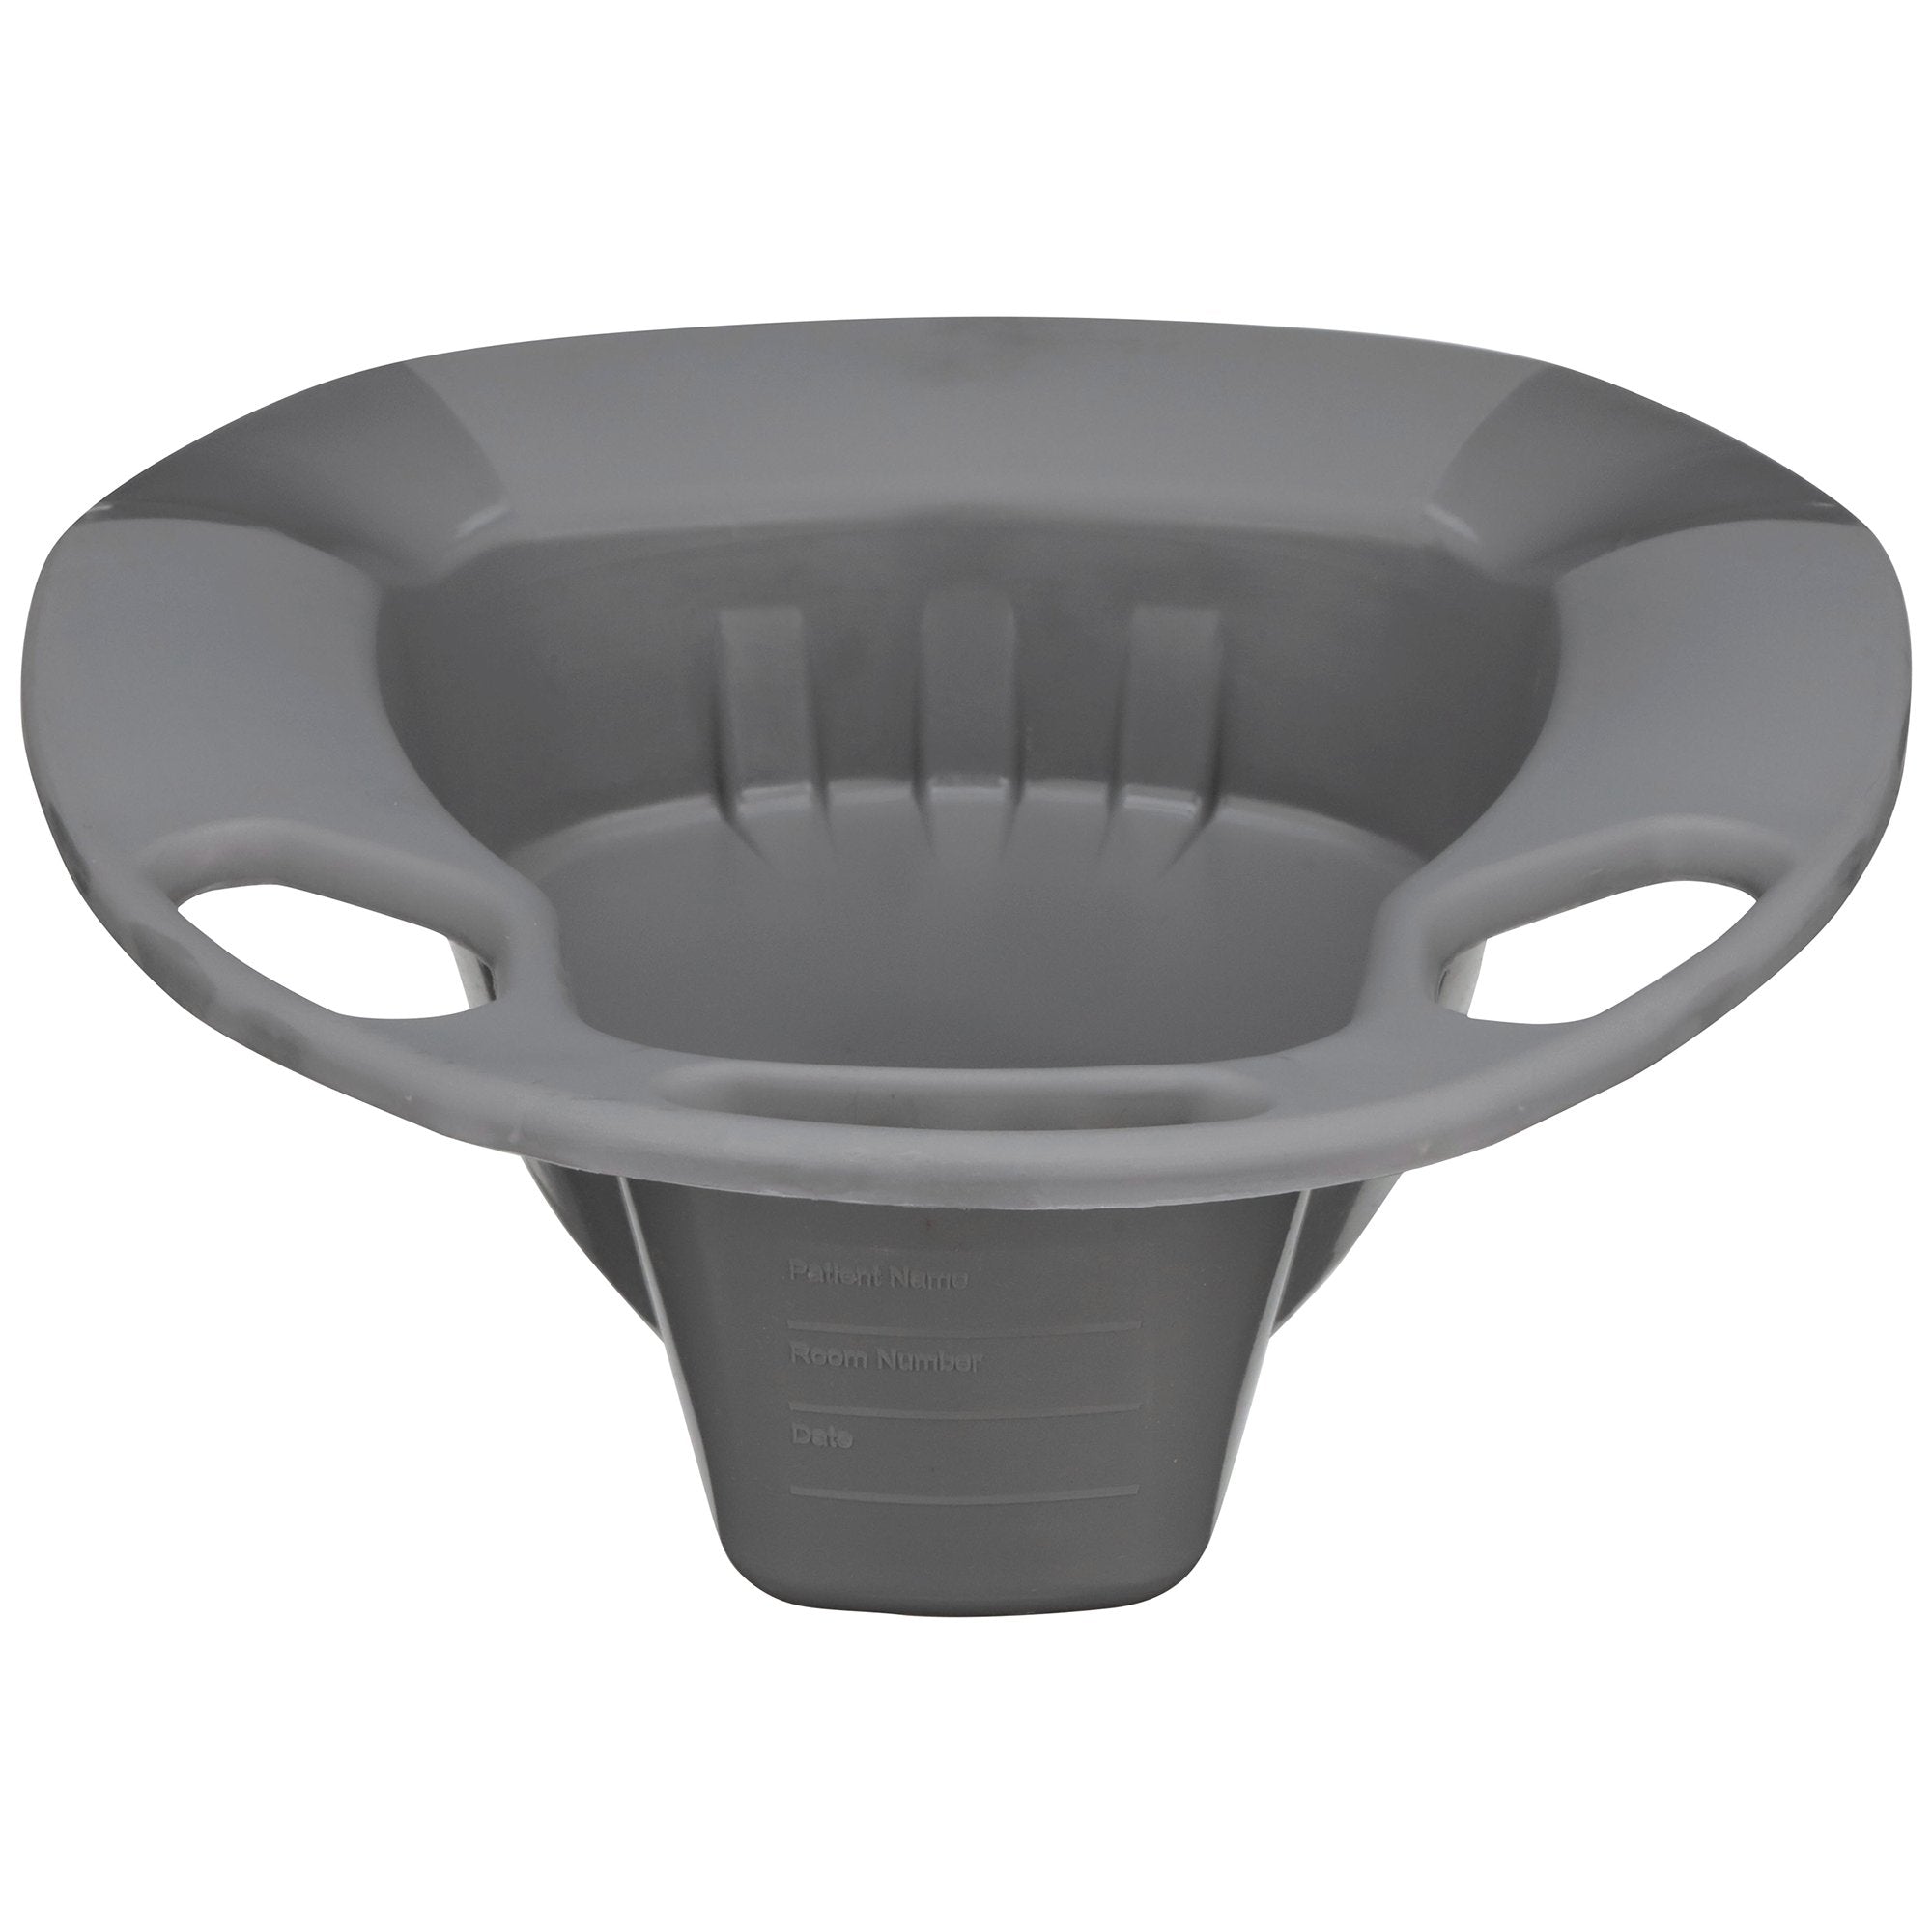 Bedroom Aids>Bedpans - McKesson - Wasatch Medical Supply